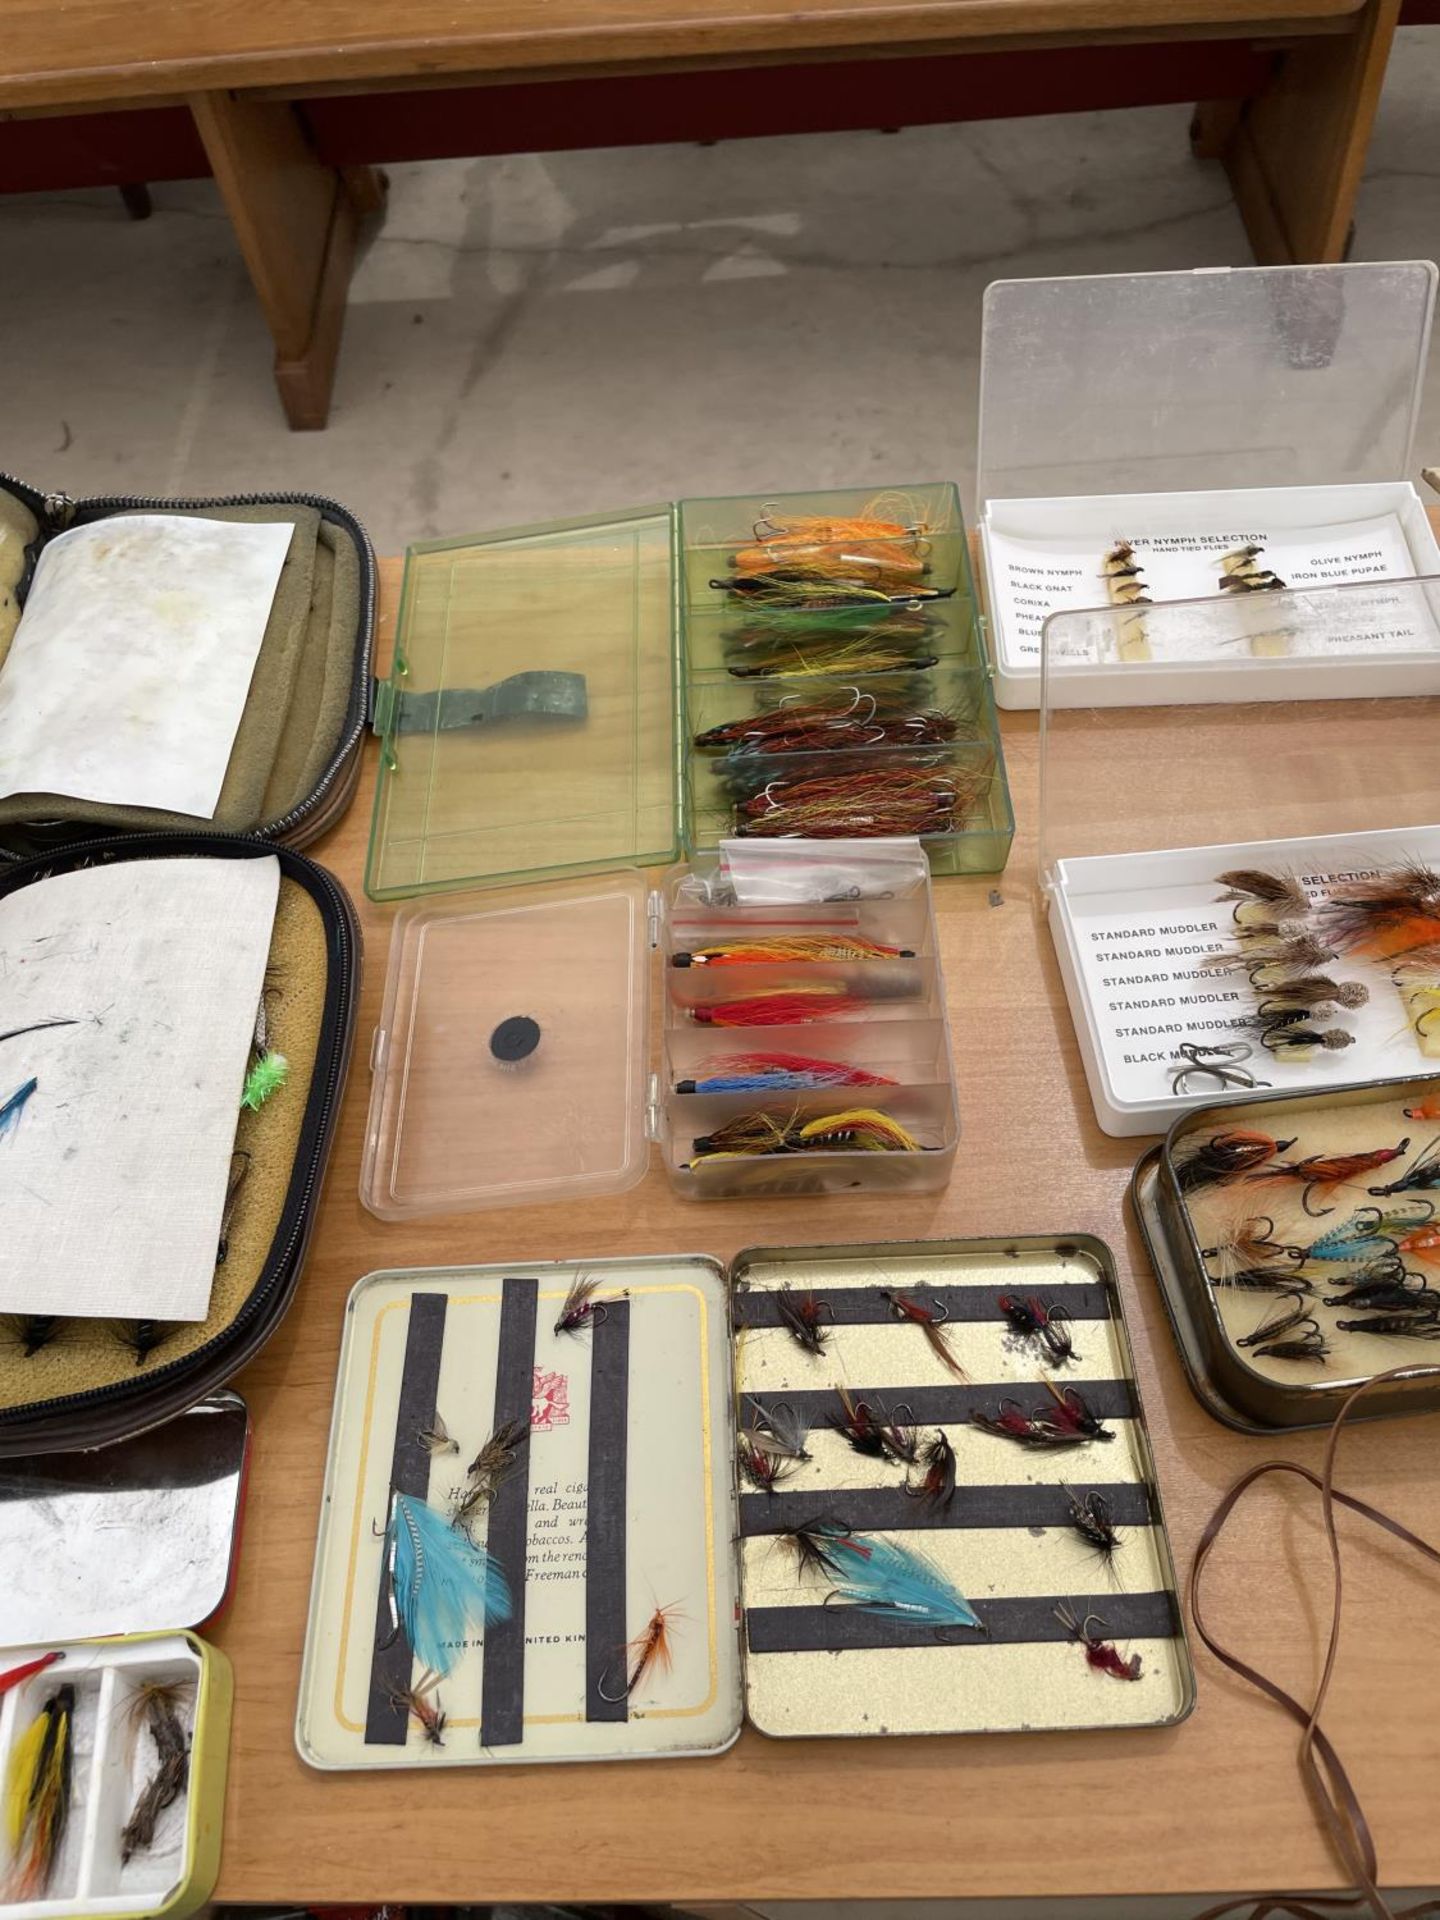 A LARGE COLLECTION OF FISHING FLIES, 3 WALLETS, 2 BOXES OF MCHARDYS OF CARLISLE, A PRIEST AND TUBE - Image 3 of 5